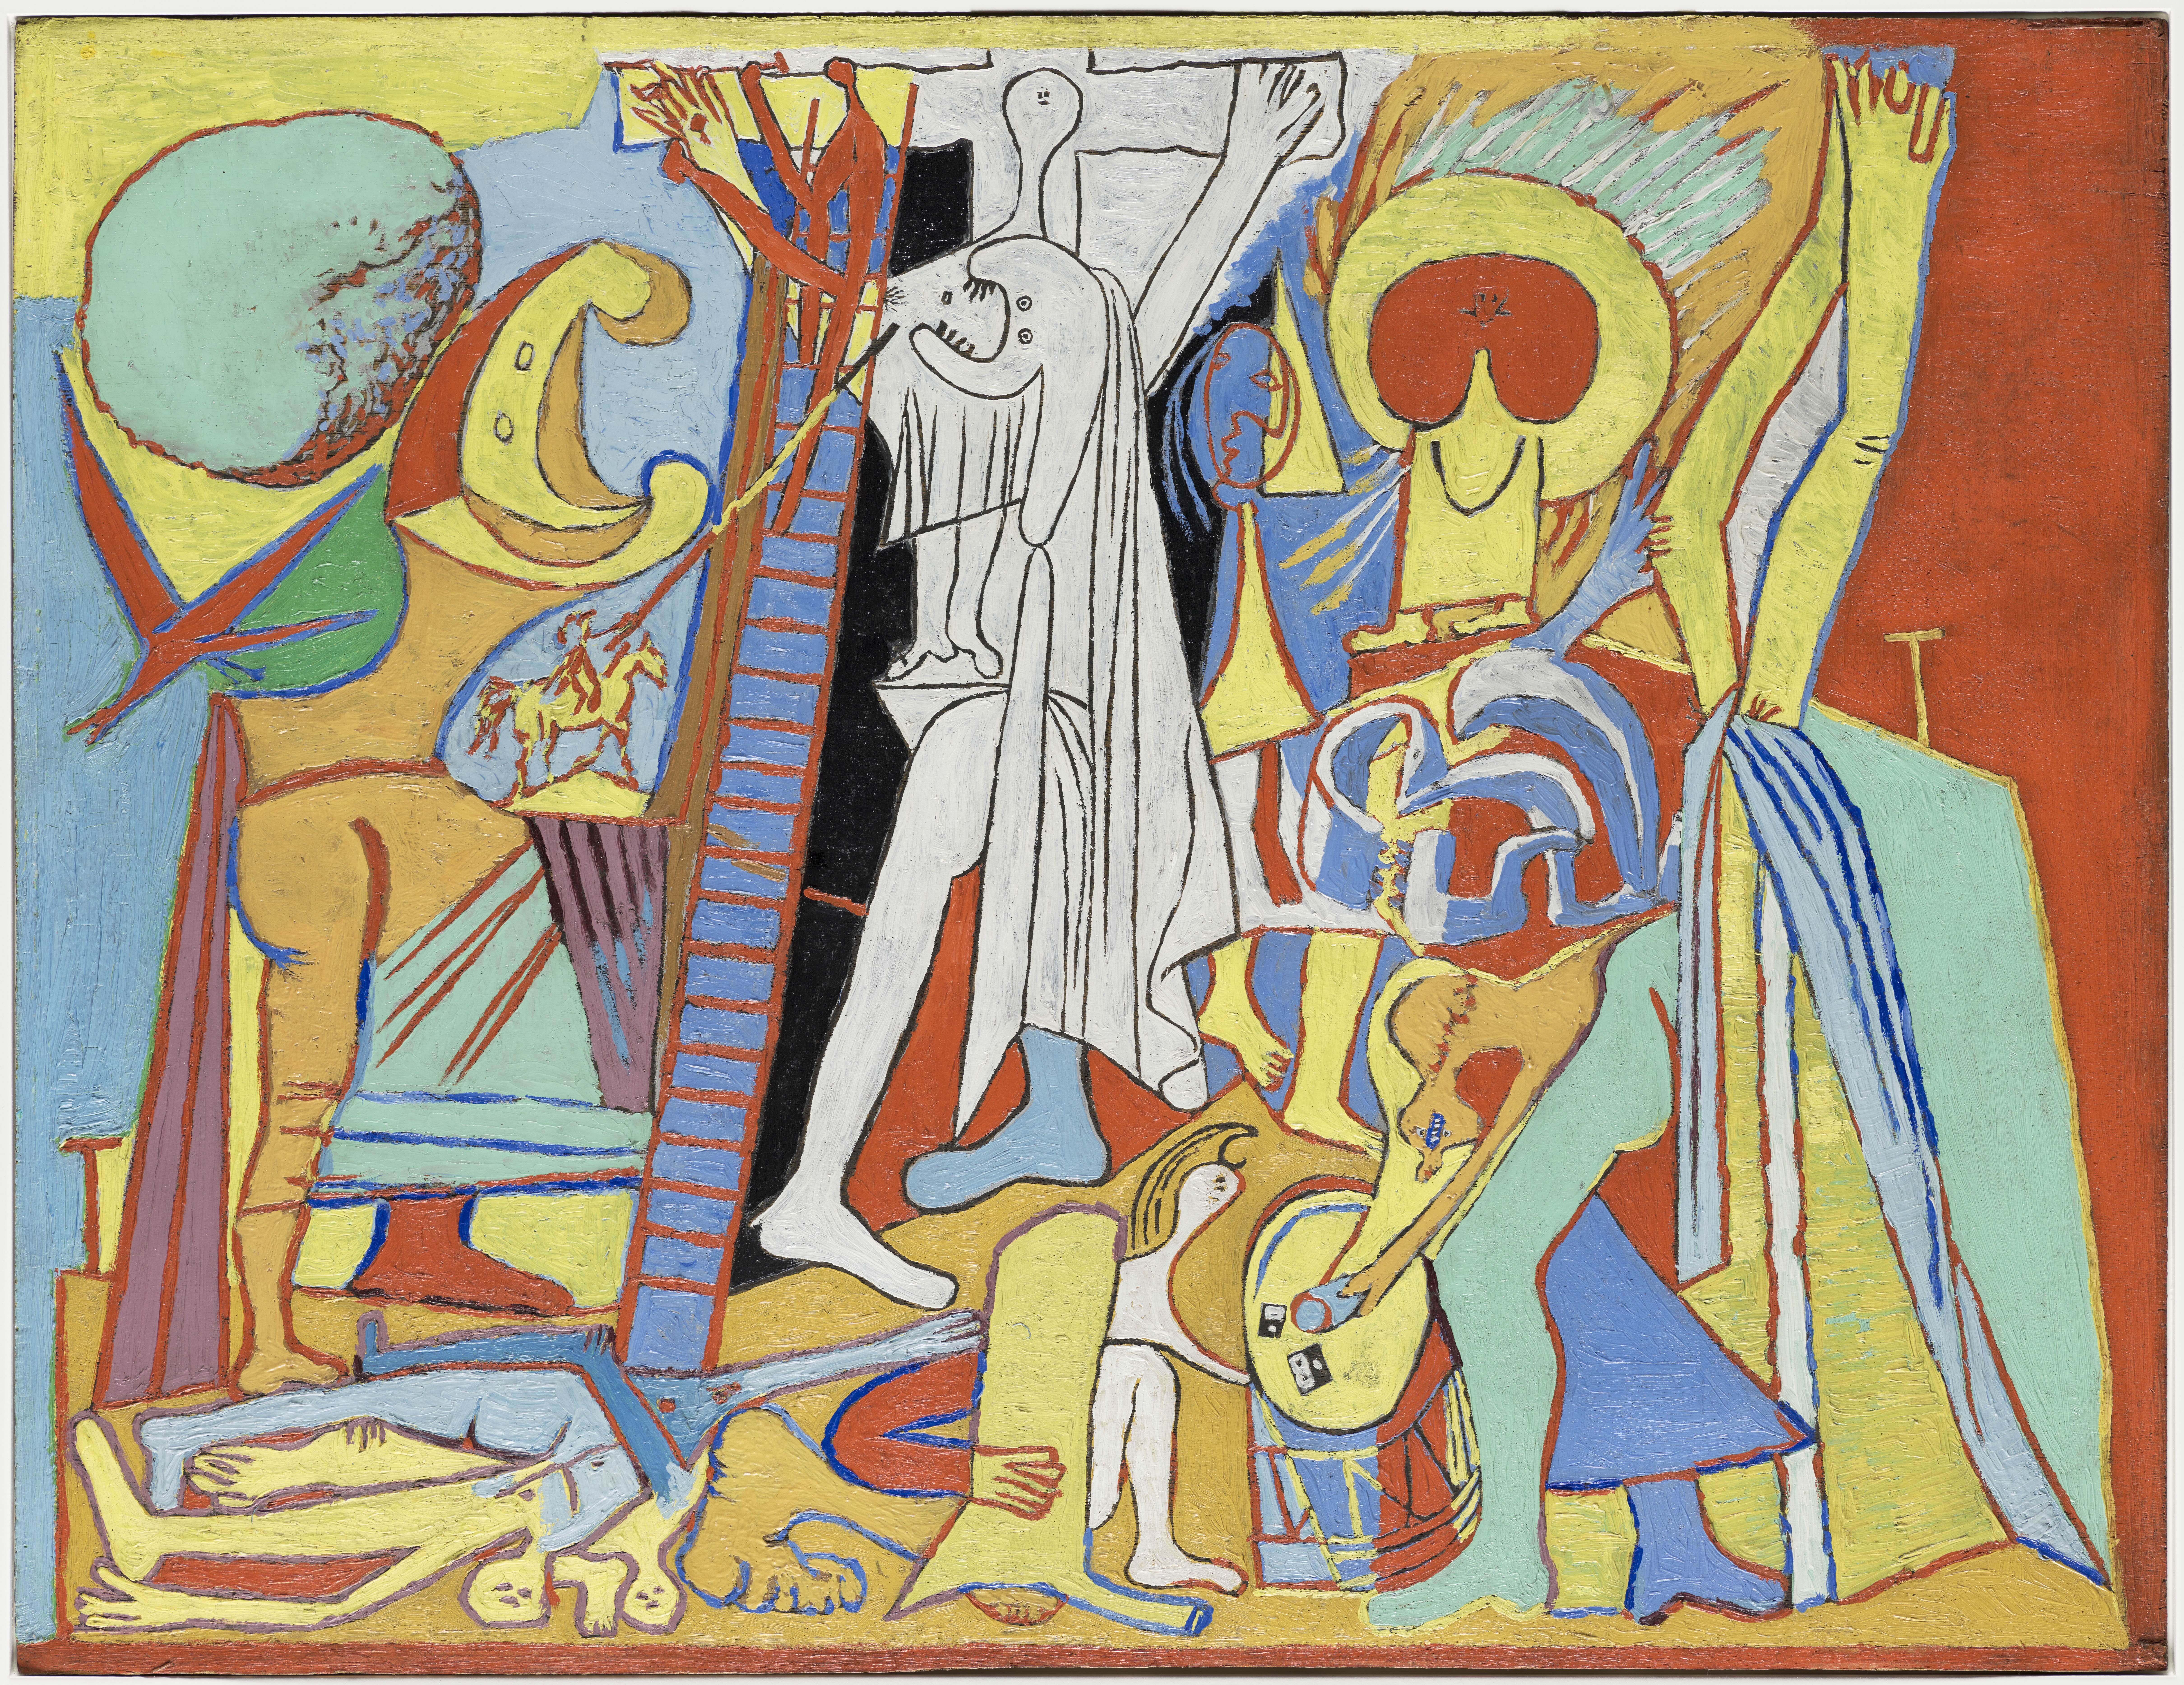 2.Pablo Picasso.  The Crucifixion Paris February 7, 1930. National Picasso Museum Paris.  Dacion Pablo Picasso.  @Sucesion Pablo Picaso VEGAP Madrid The exhibitions in Madrid during the Christmas holidays 2023